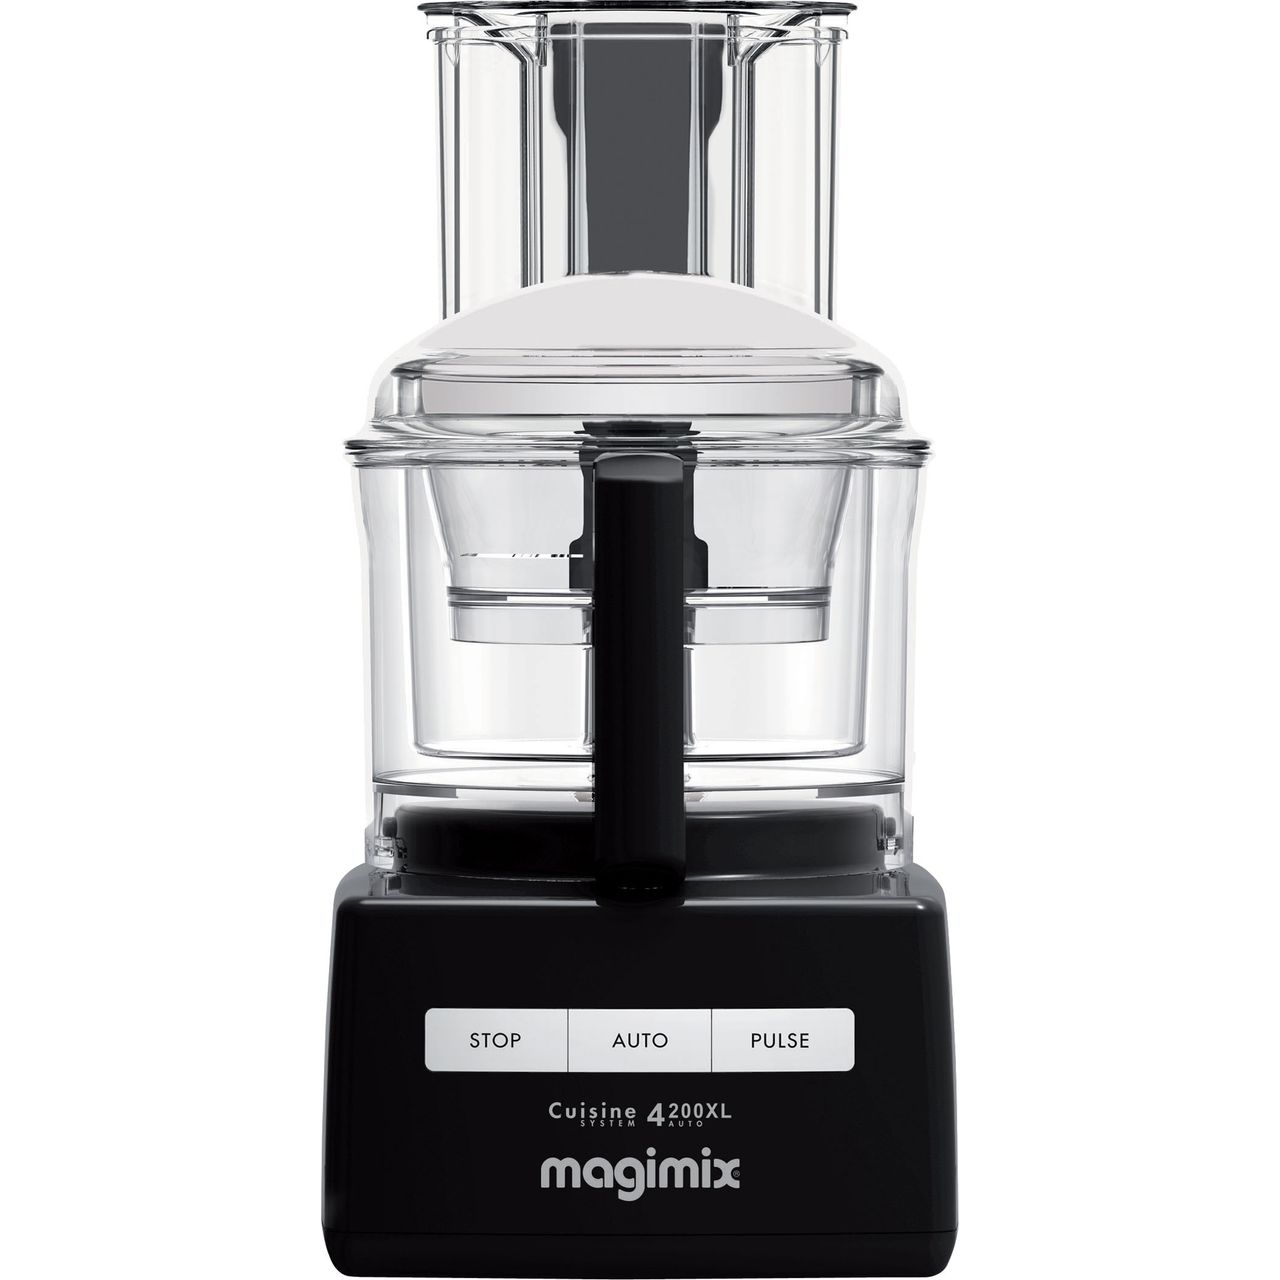 Magimix 4200XL 18473 3 Litre Food Processor With 11 Accessories Review